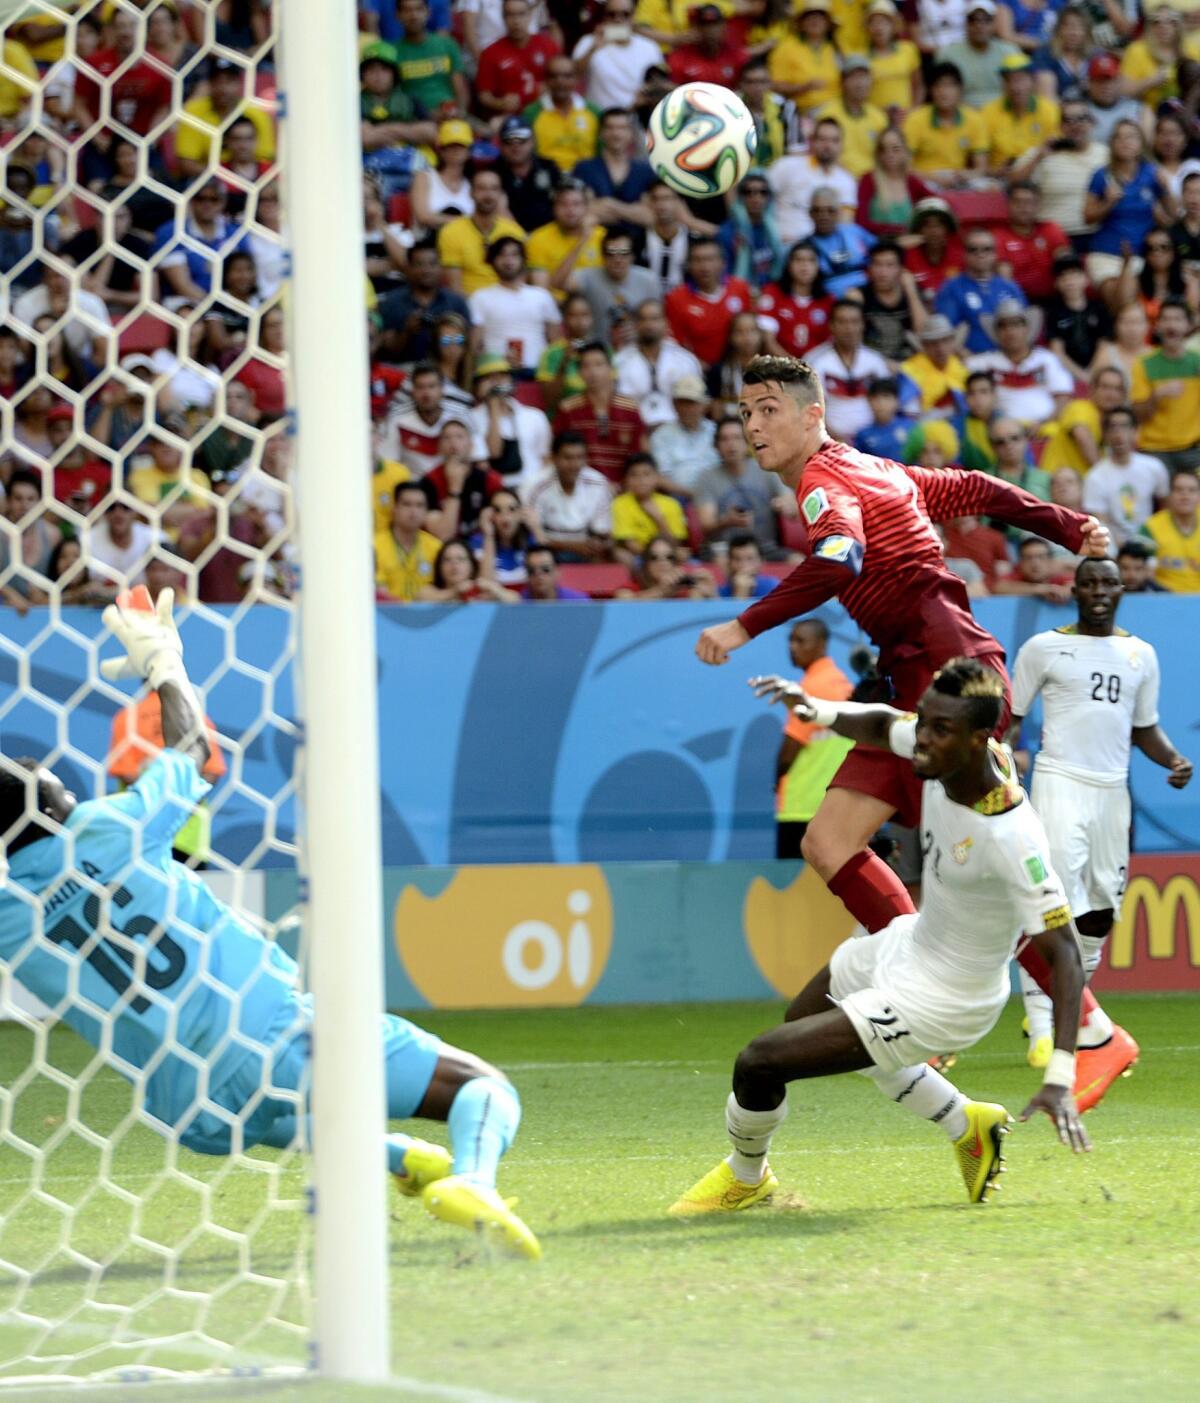 Cristiano Ronaldo of Portugal misses a goal during the World Cup match against Ghana on June 26.